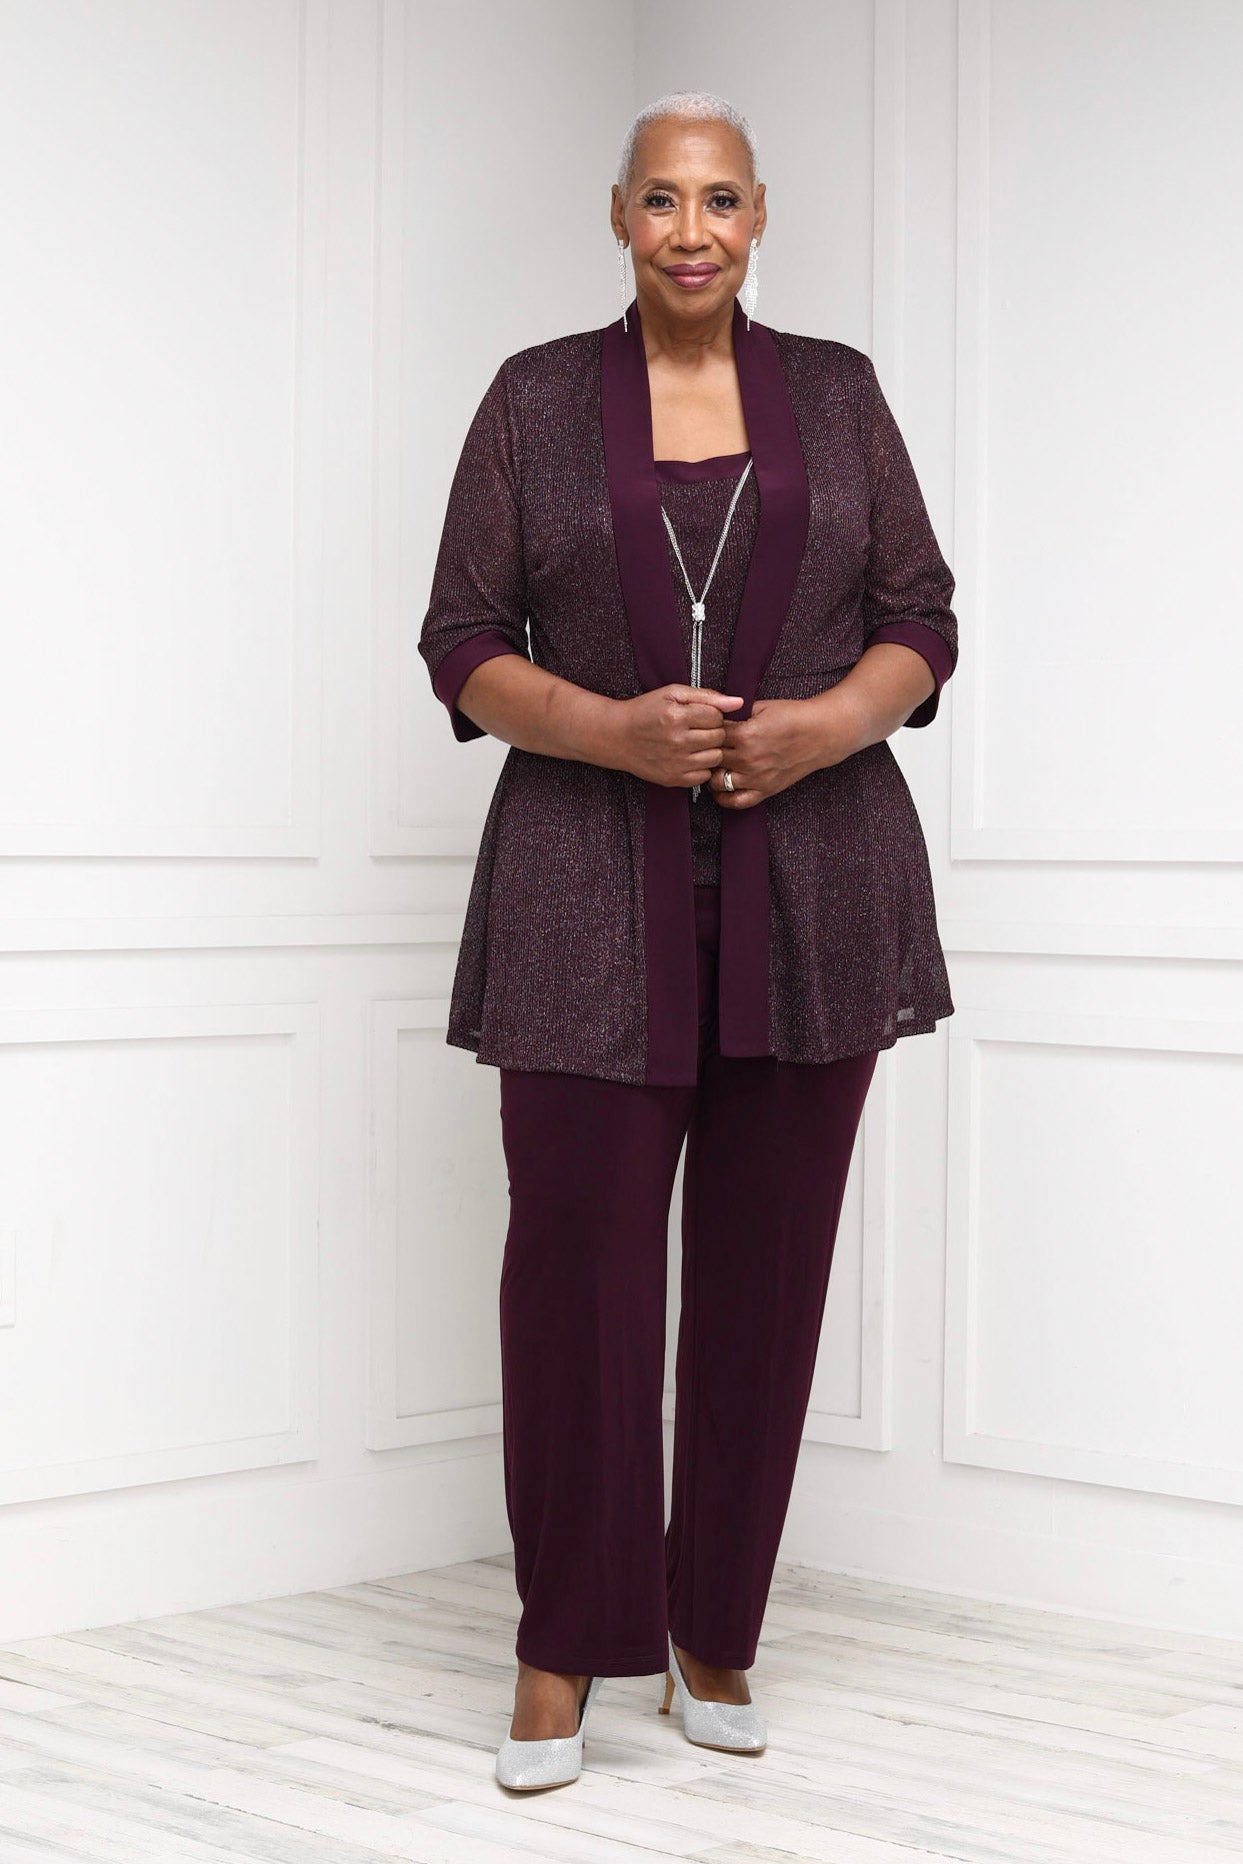 Women's Plus Size Formal Pant Suits For Weddings | lupon.gov.ph